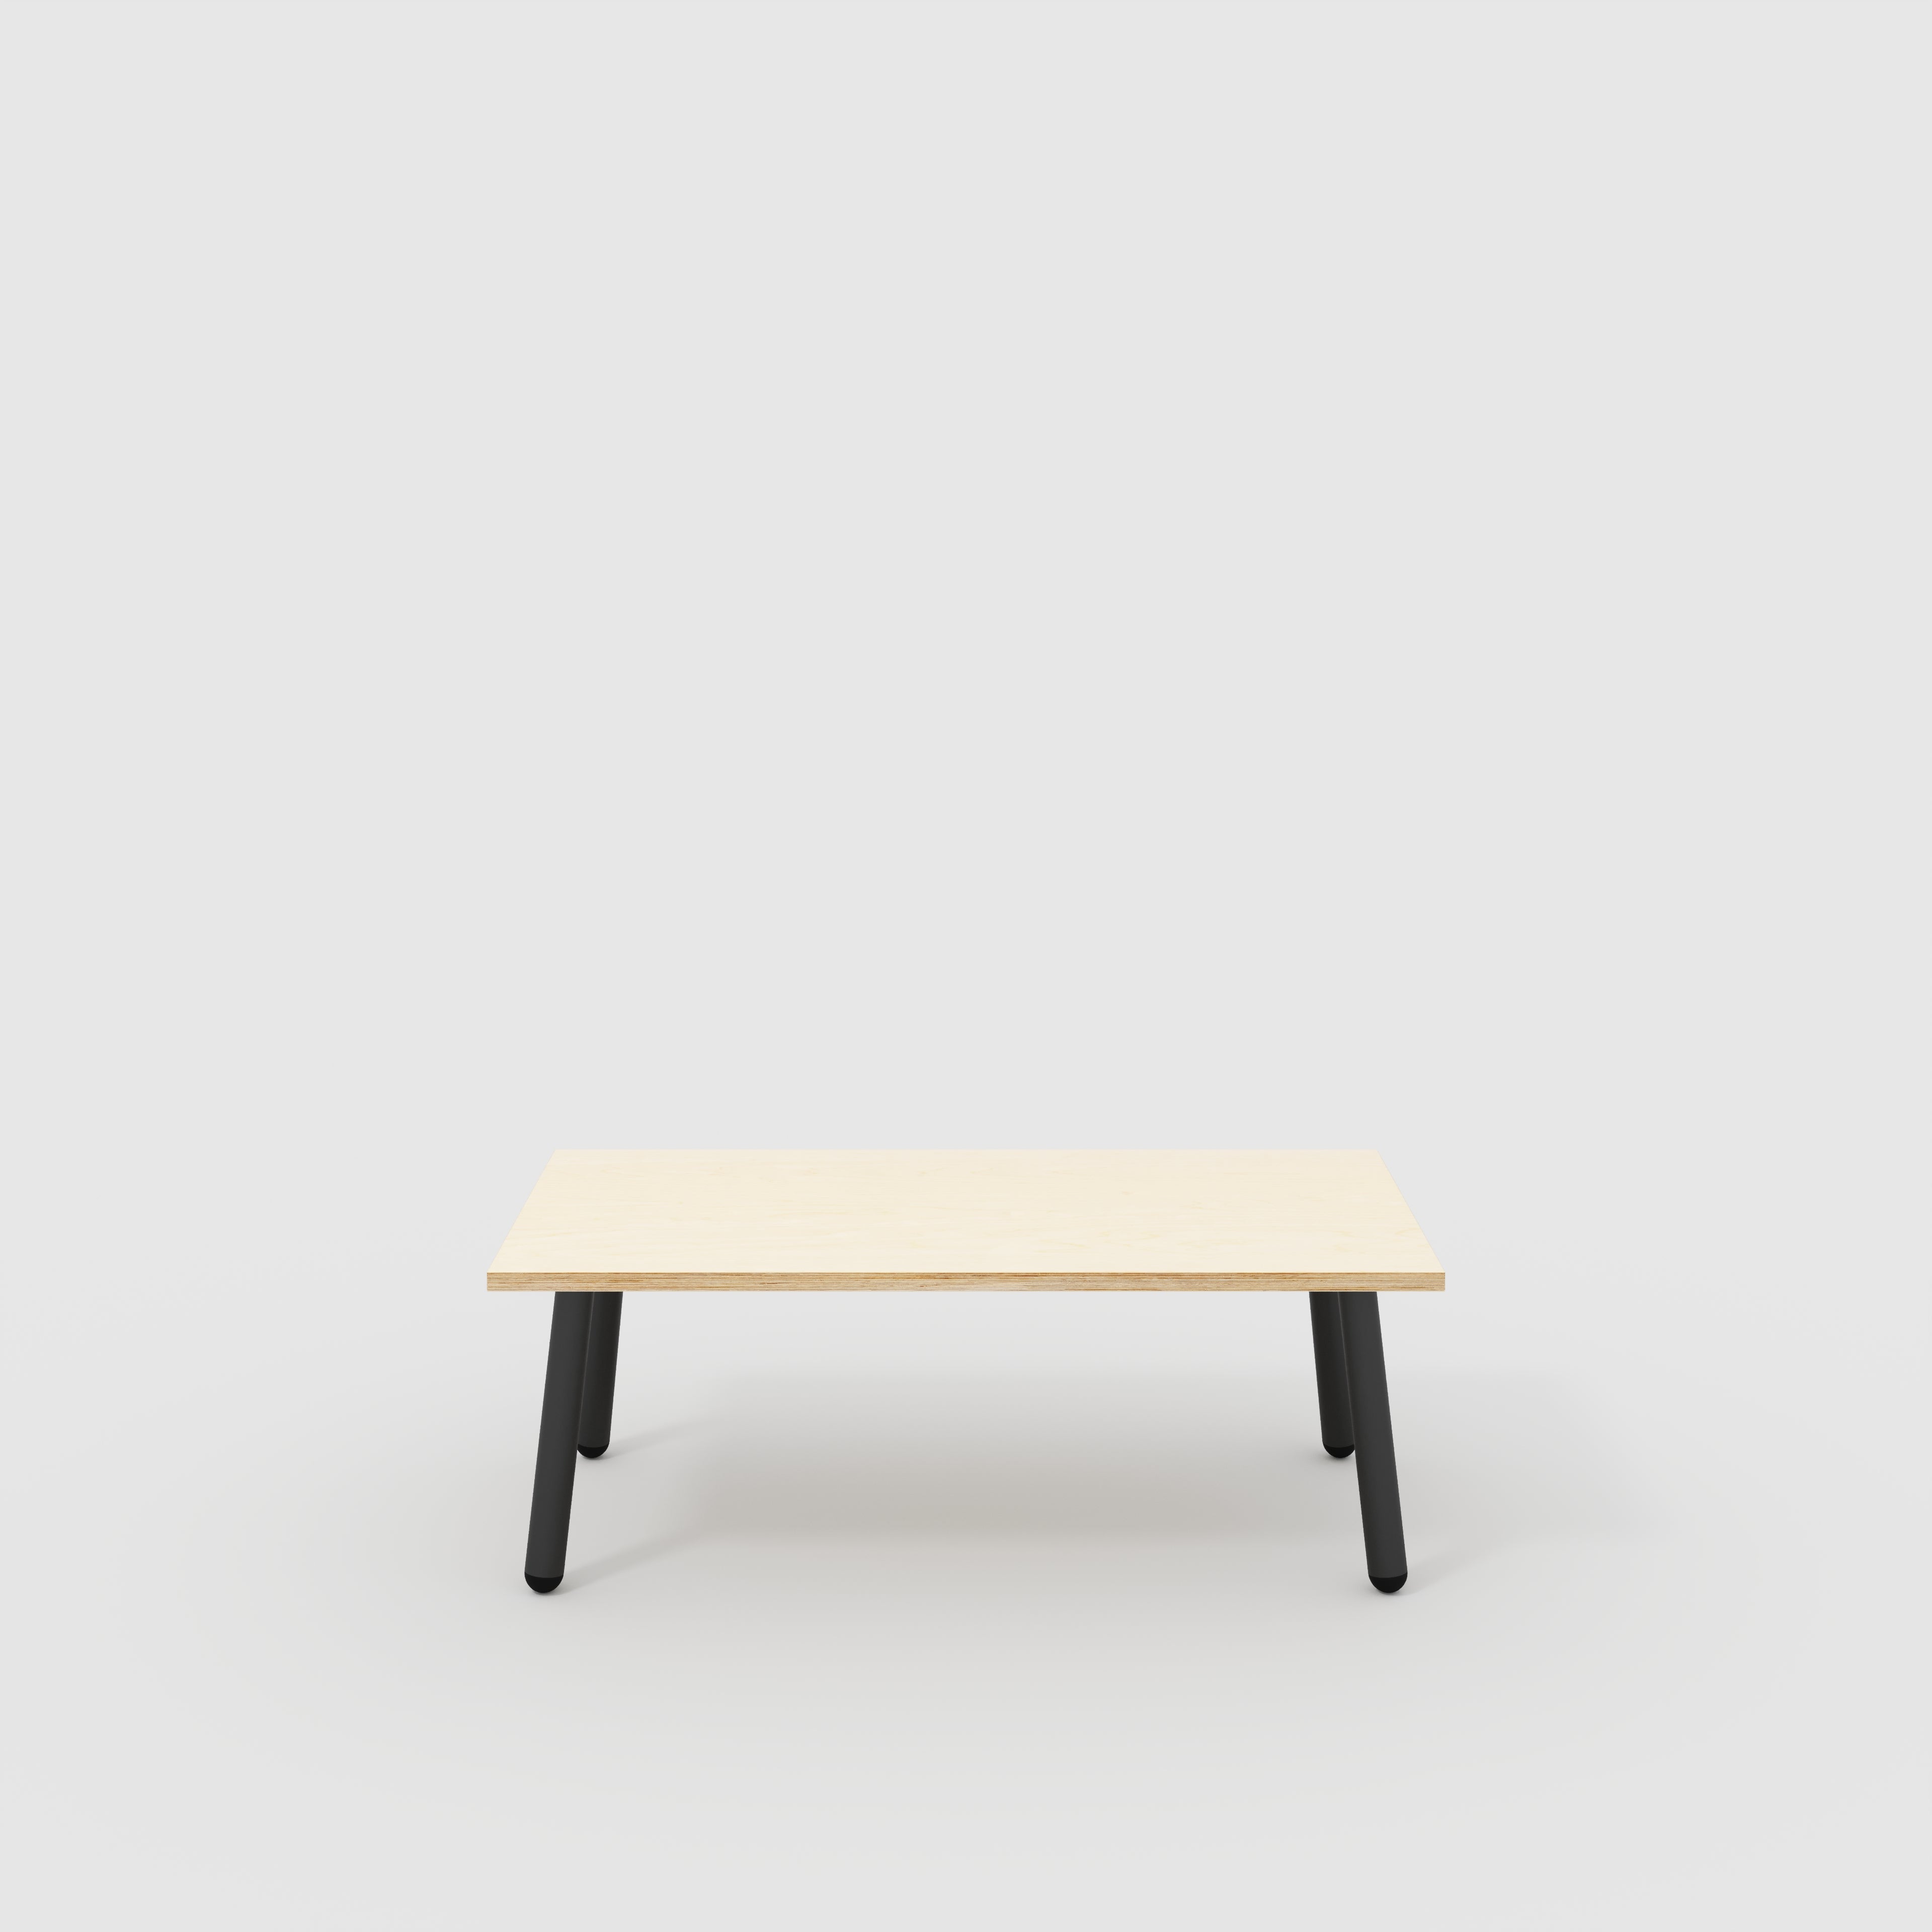 Coffee Table with Black Round Single Pin Legs - Plywood Birch - 1200(w) x 600(d) x 425(h)